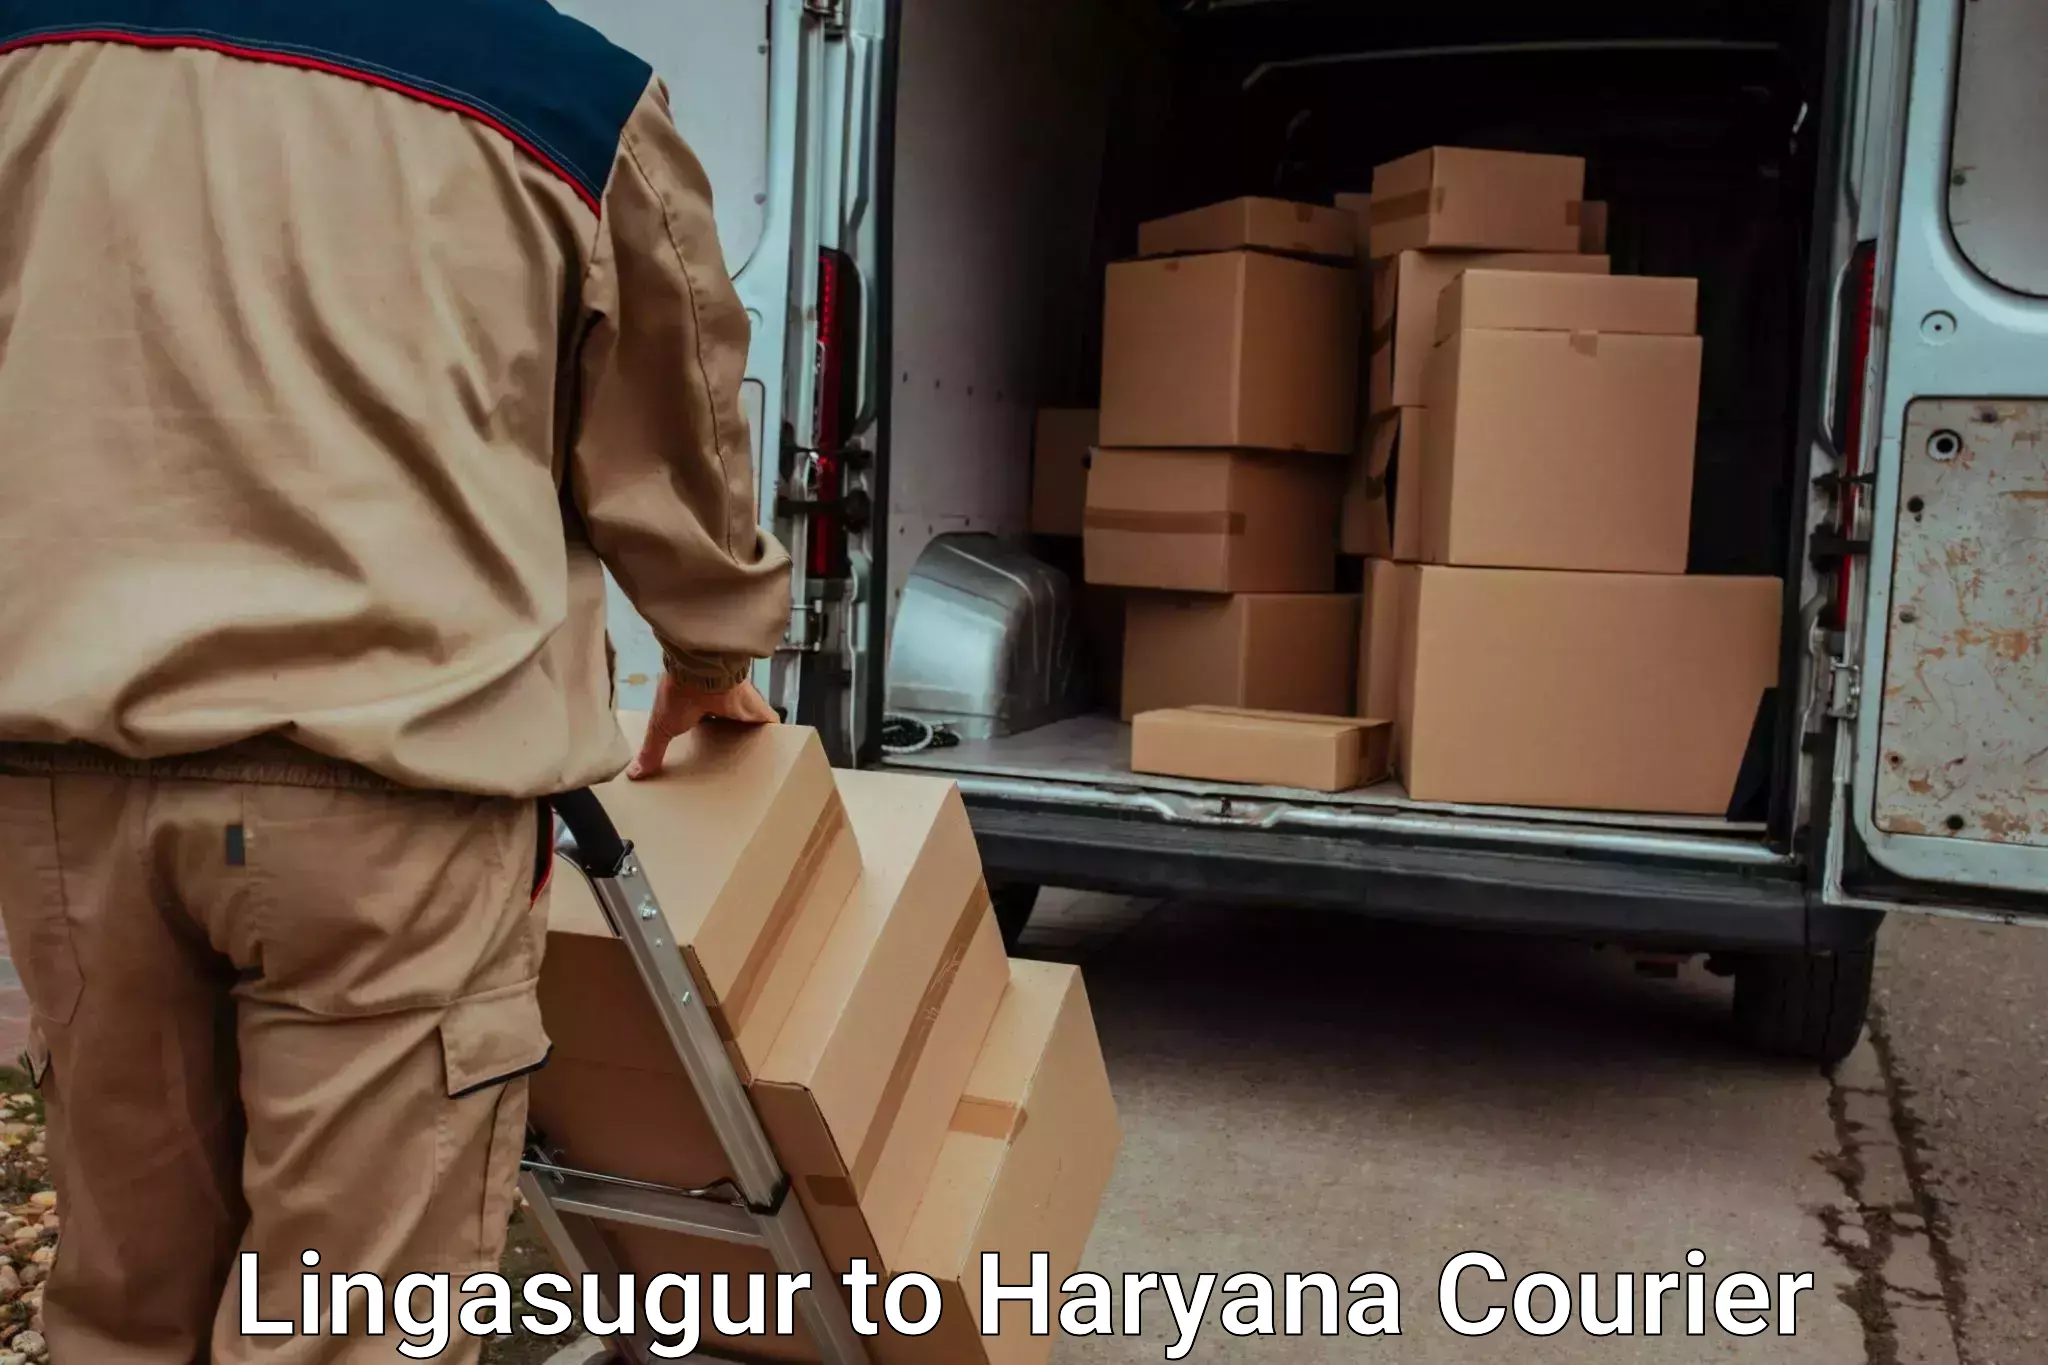 Furniture transport specialists Lingasugur to NCR Haryana